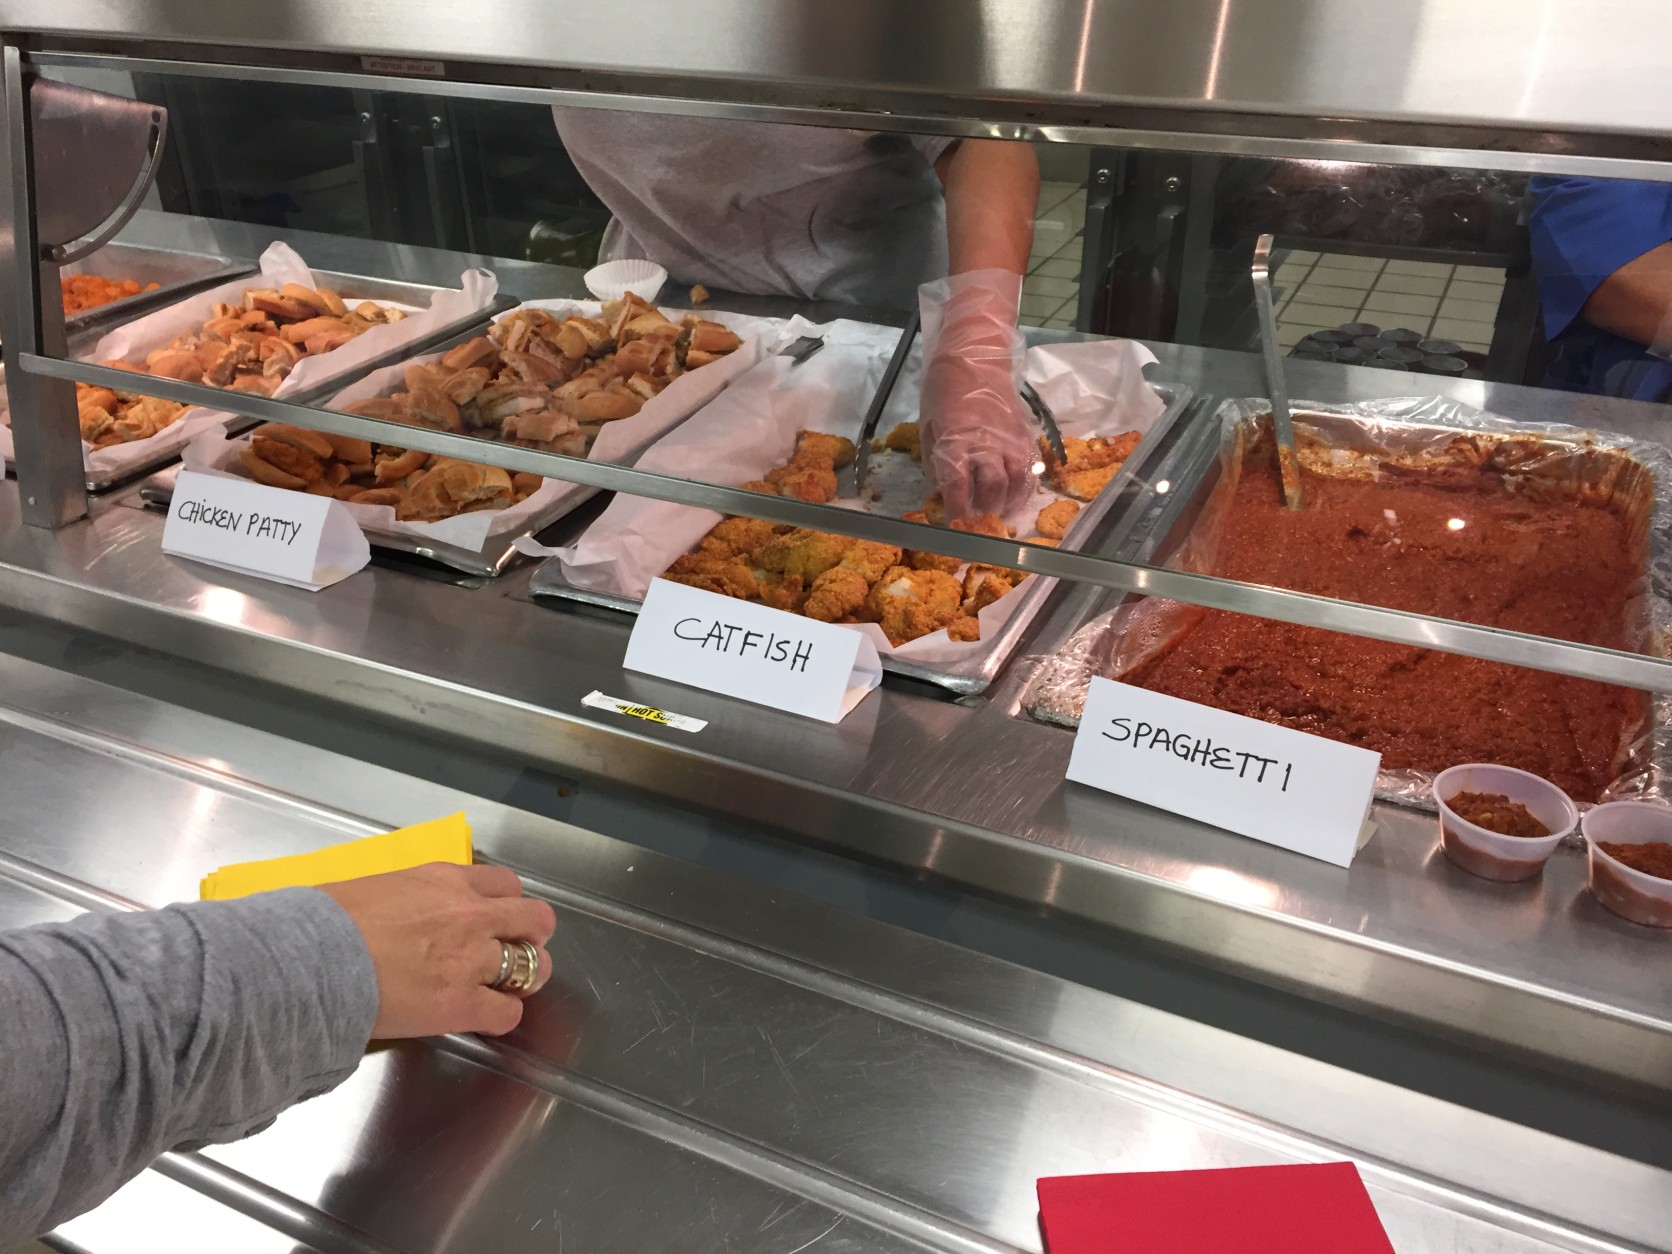 For the first time, Arlington Public Schools held a cafeteria open house and invited parents and kids to taste-test breakfast and lunch items. (WTOP/Michelle Basch)